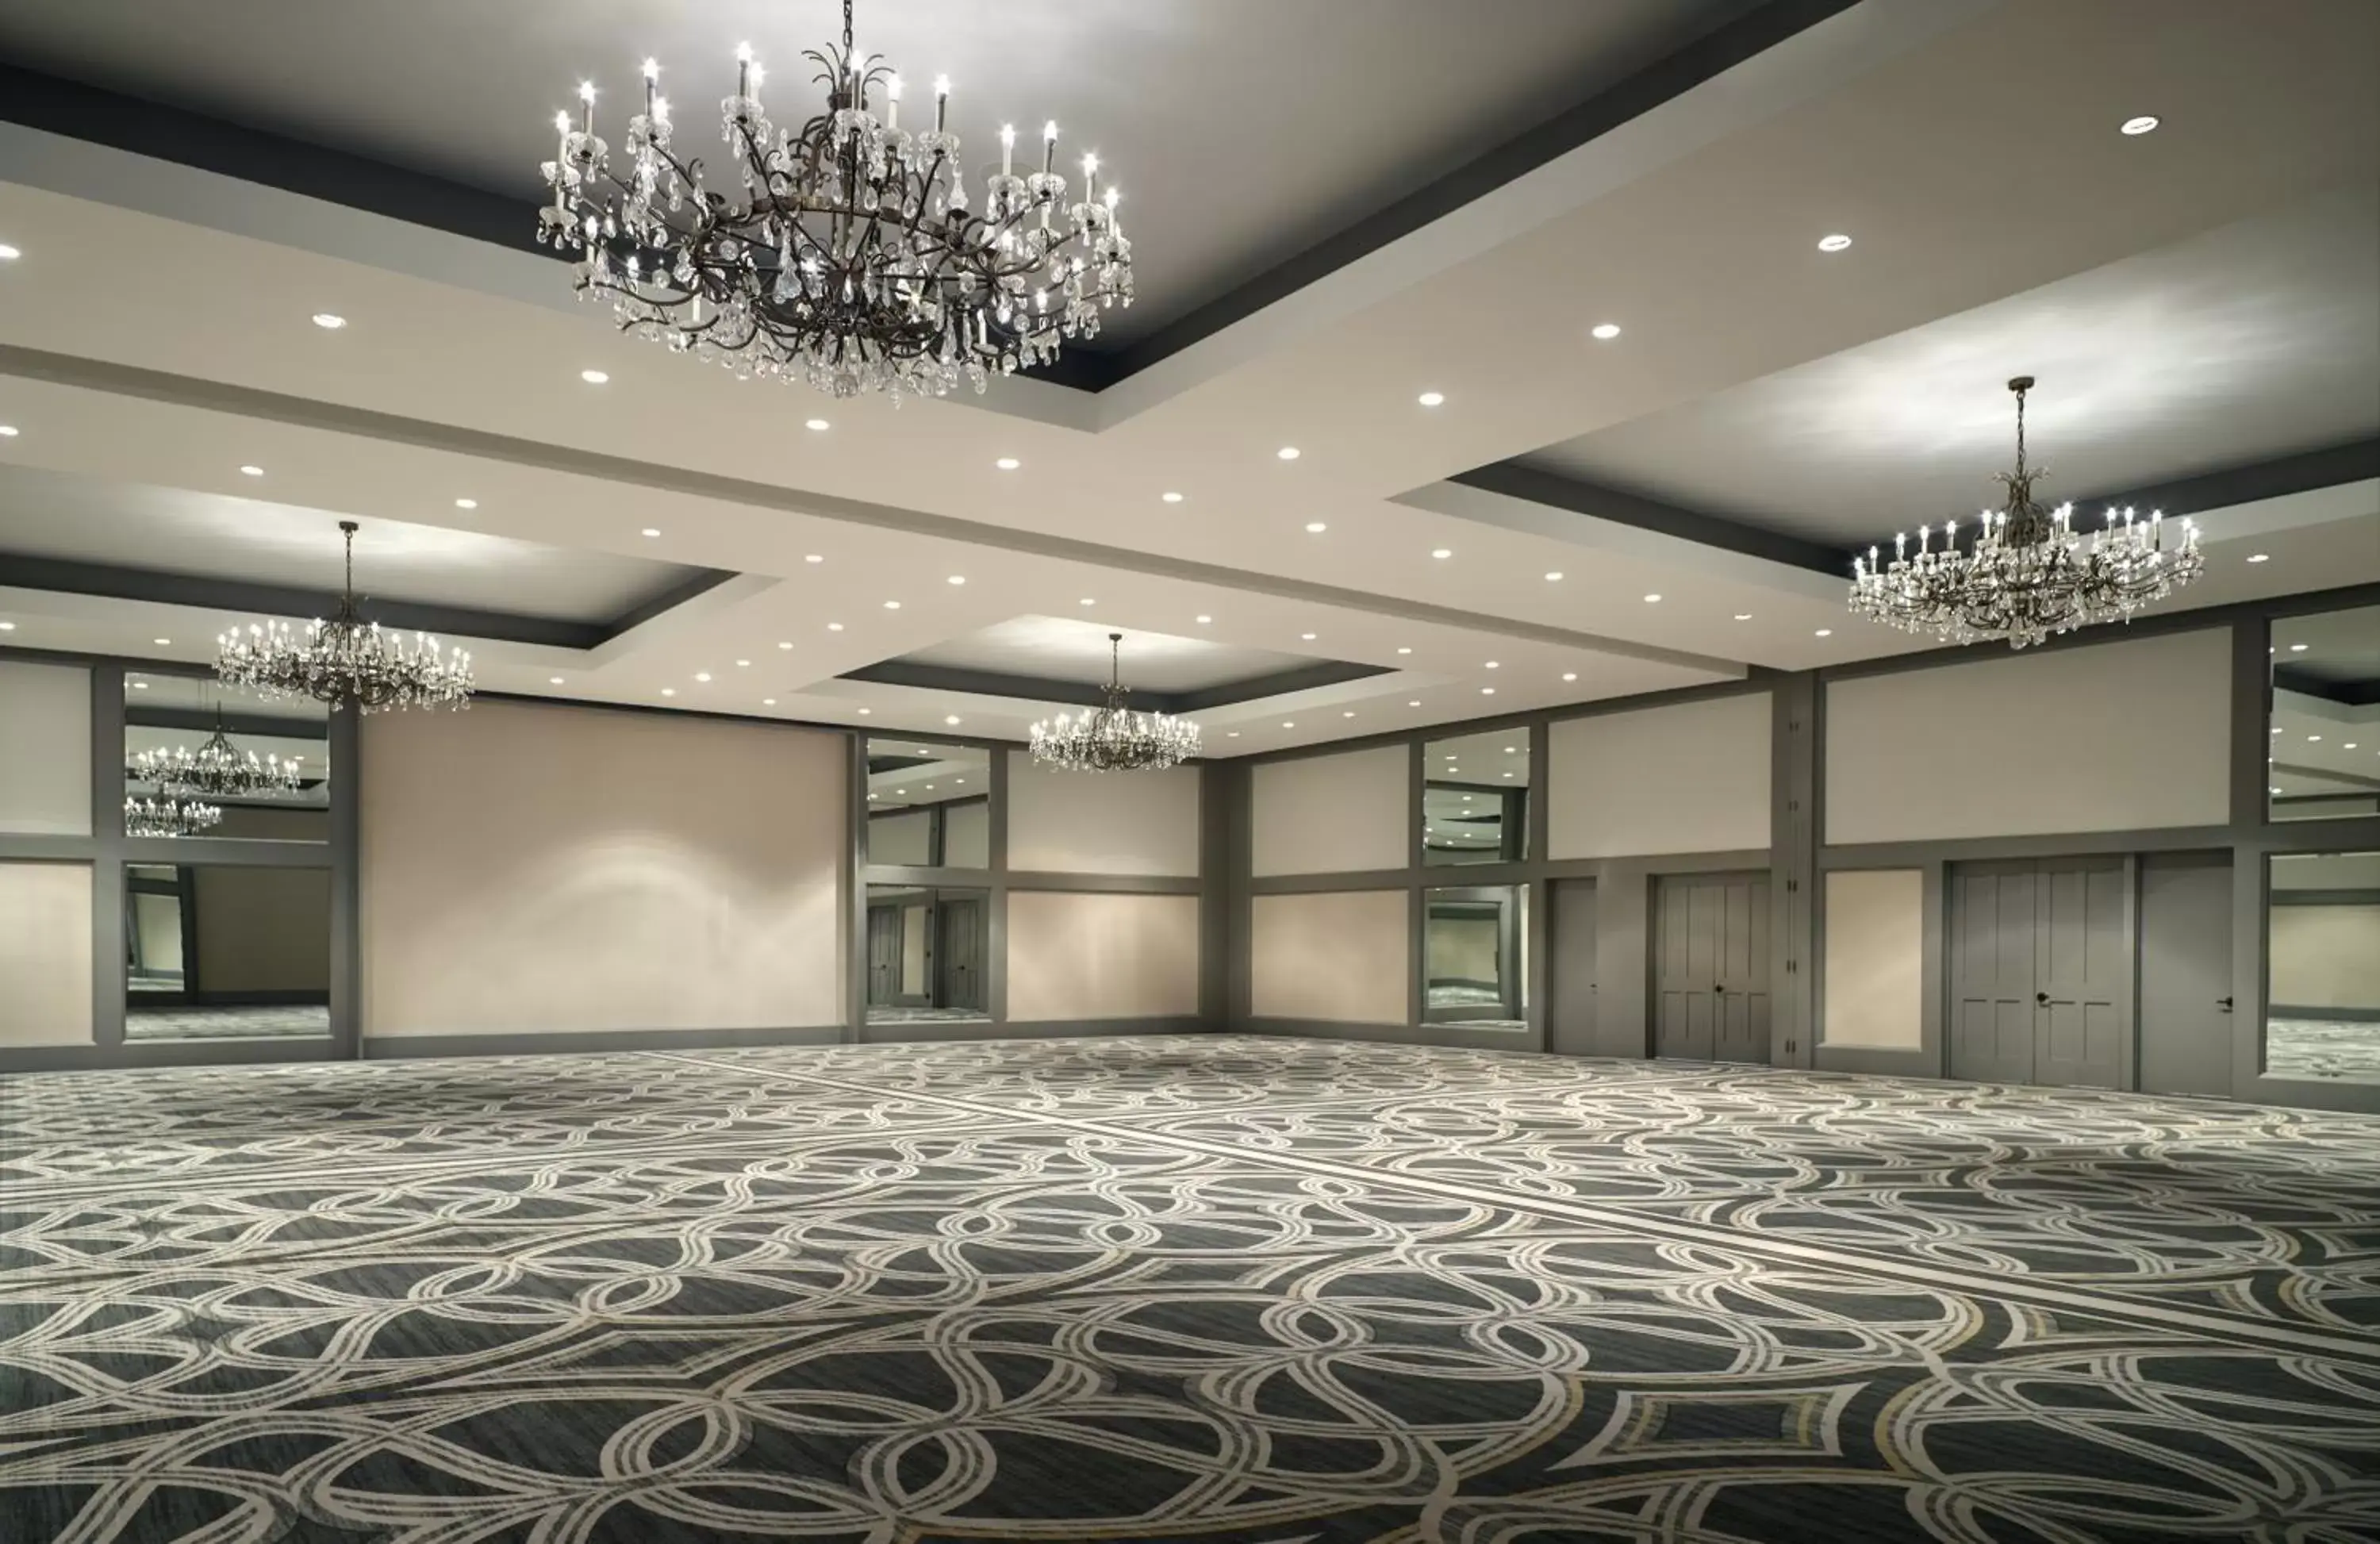 Banquet/Function facilities in Omni Houston Hotel